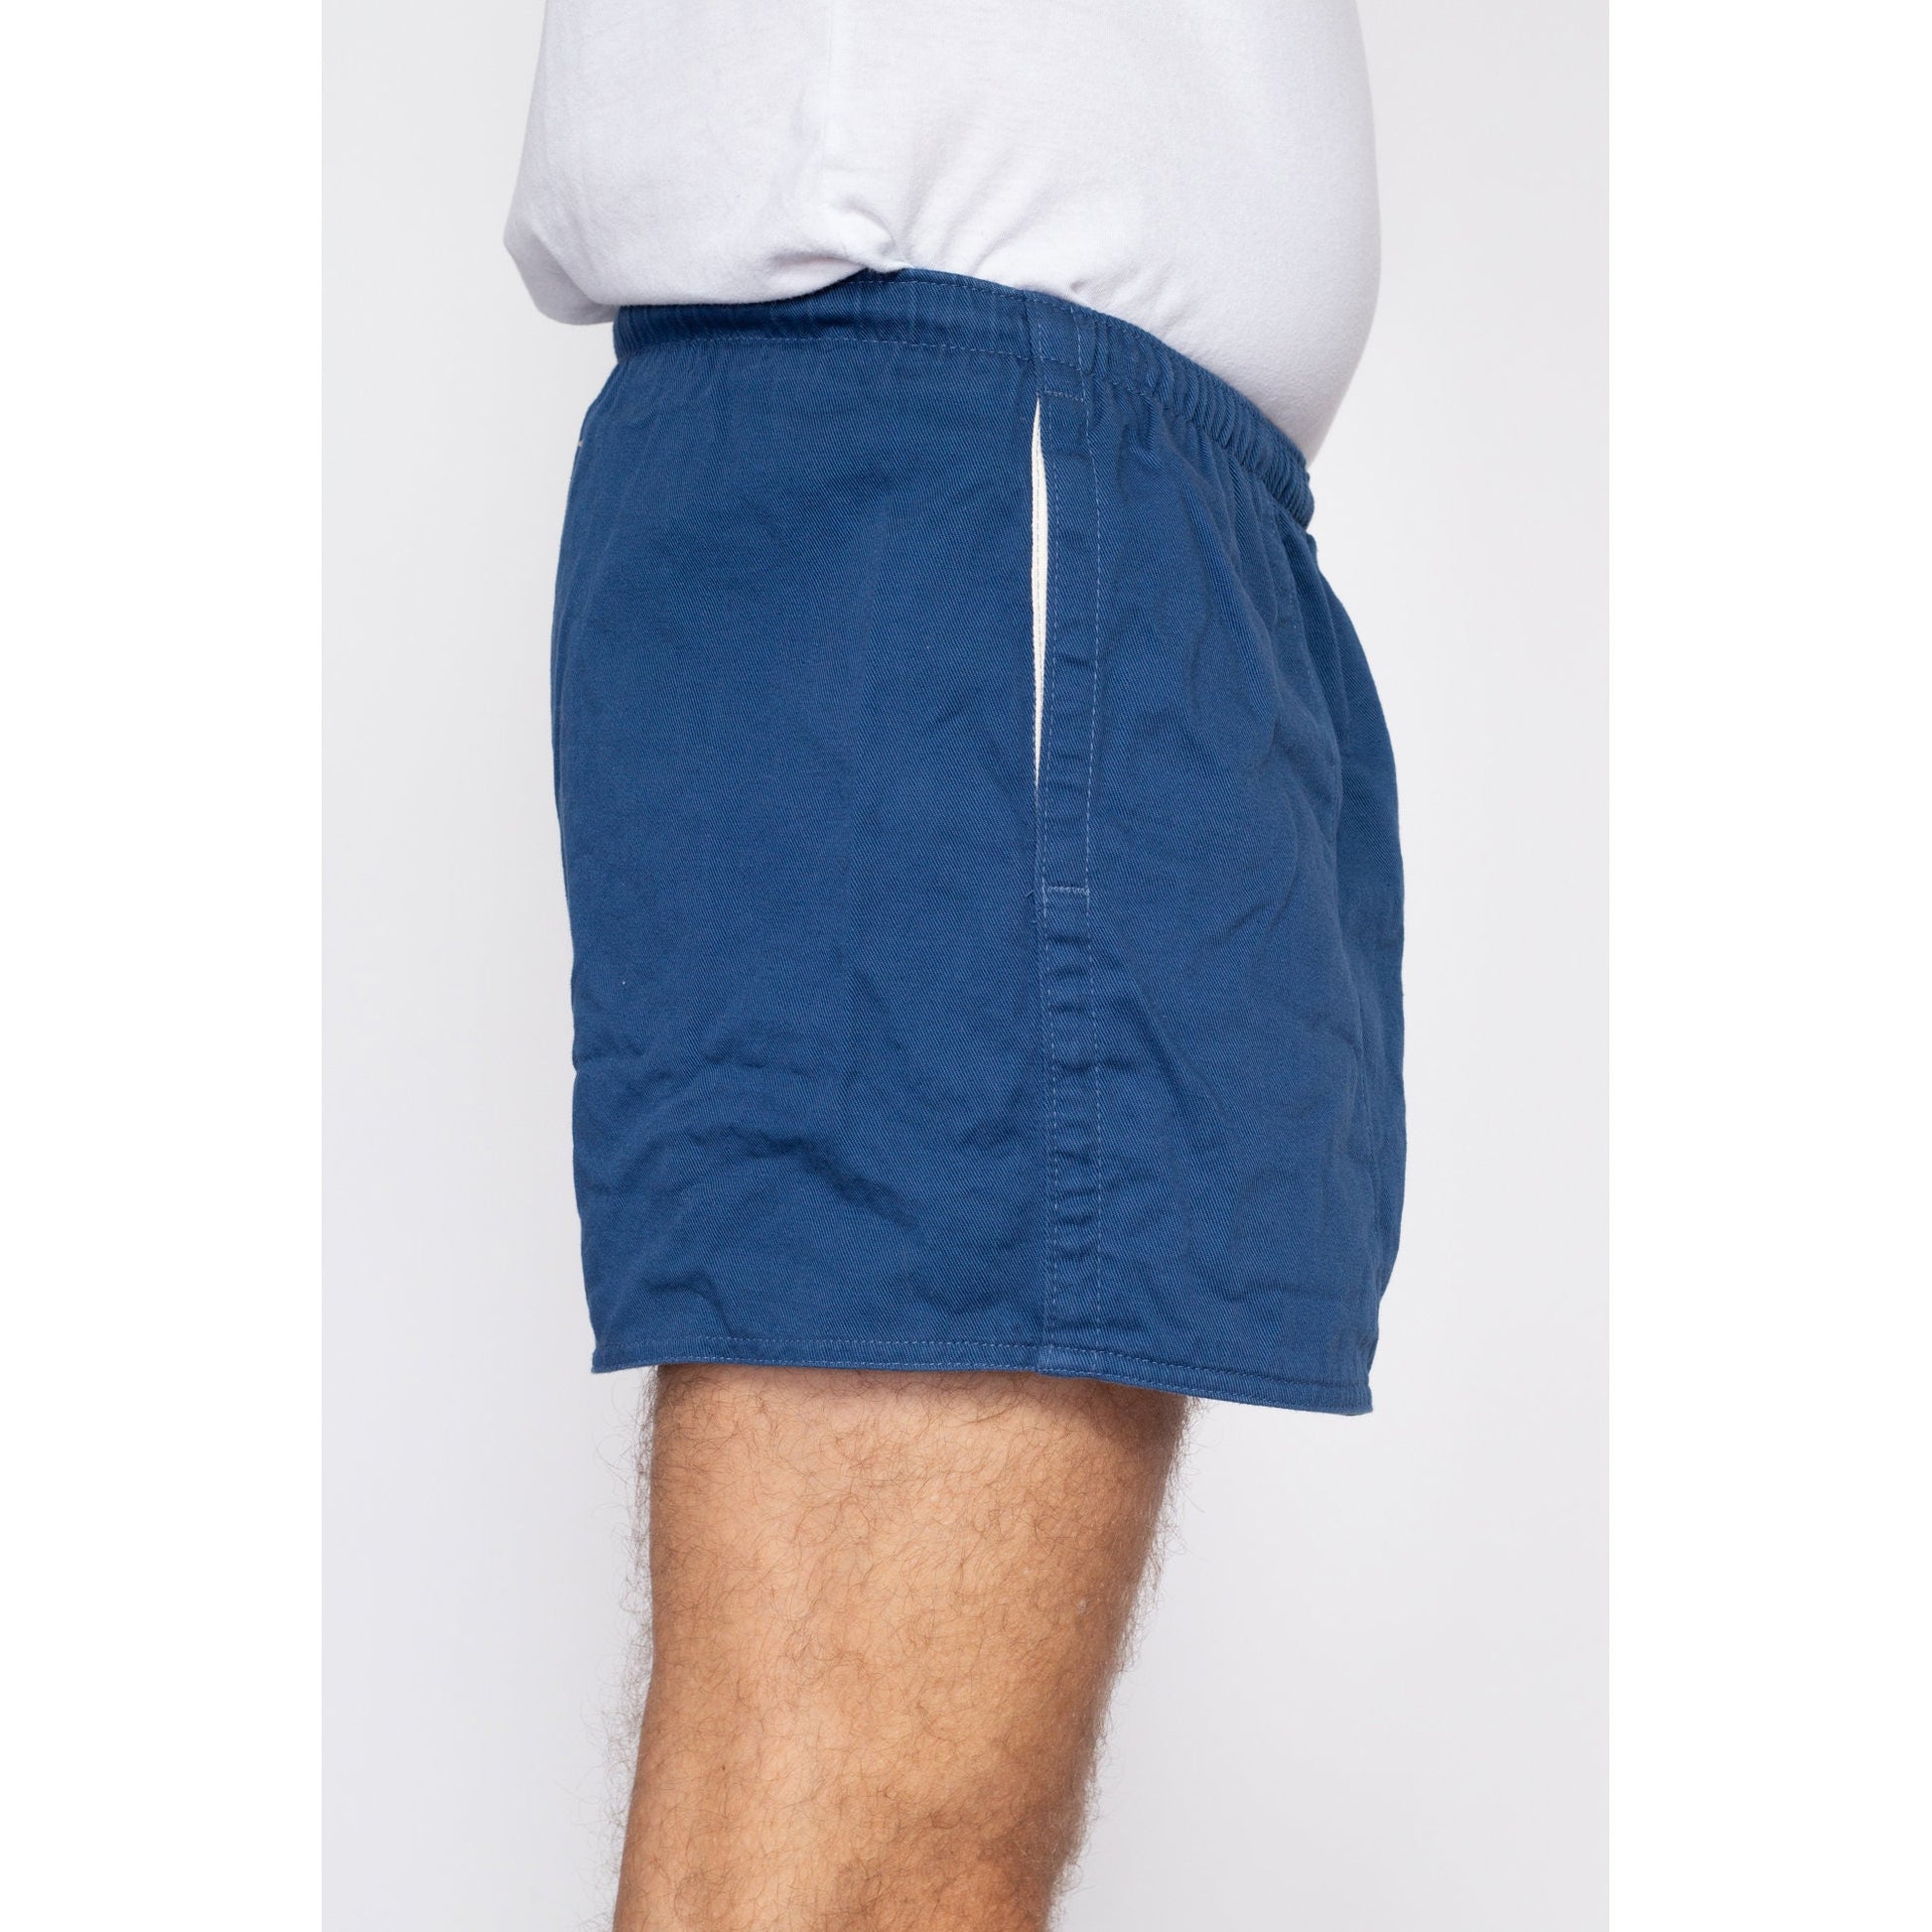 28"-36" Waist 80s Canterbury New Zealand Rugby Shorts | Vintage Blue Cotton Athletic Shorts